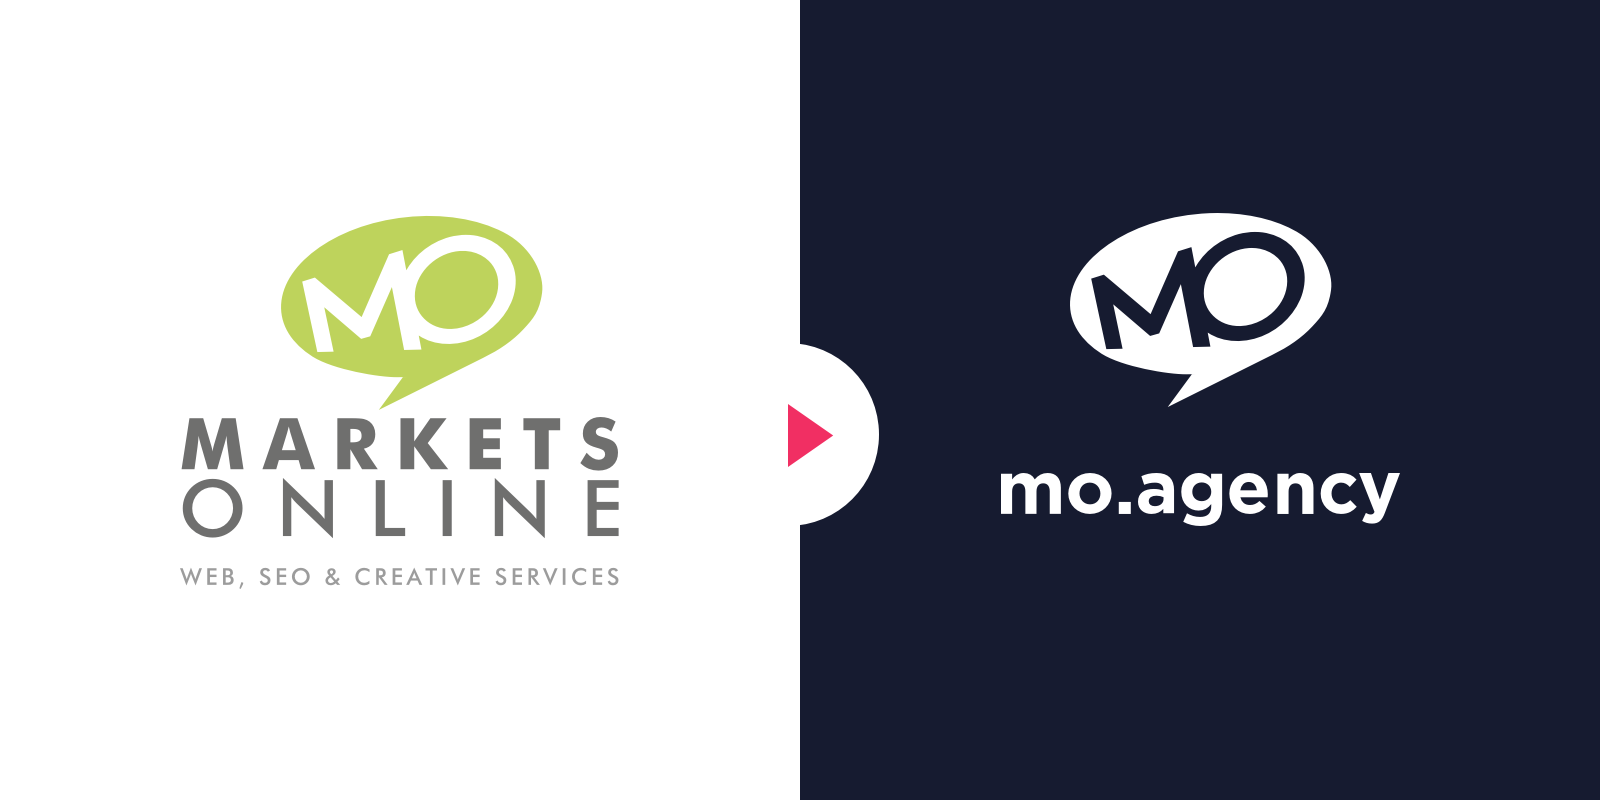 Markets Online, the biggest little agency, rebrands to MO